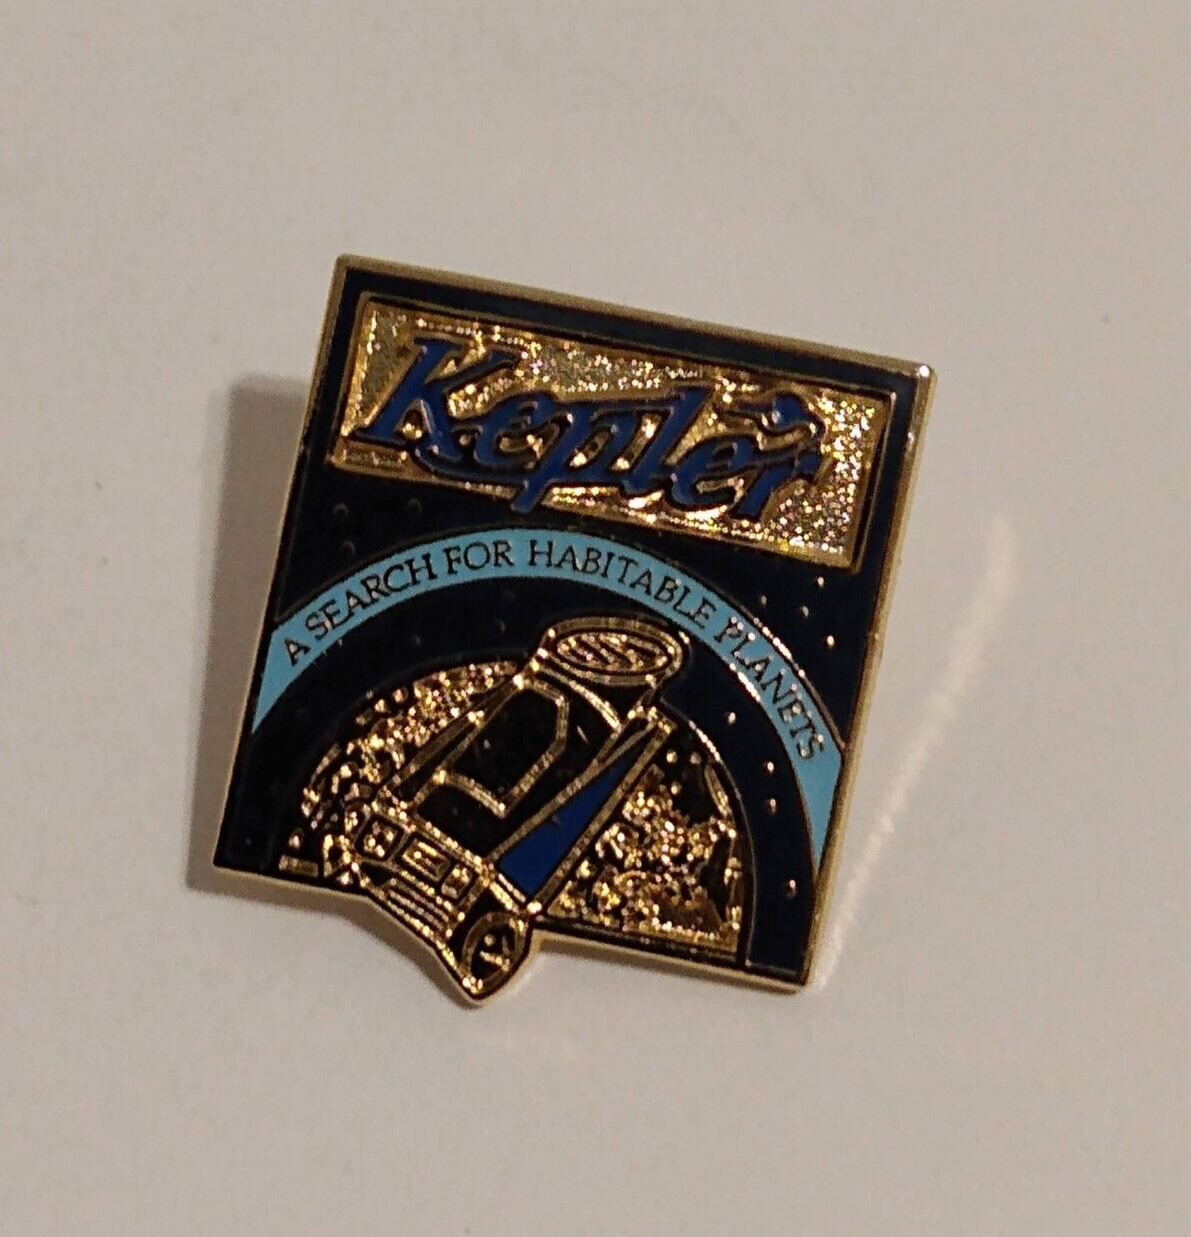 Kepler A Search For Habitable Planets Lapel Pin